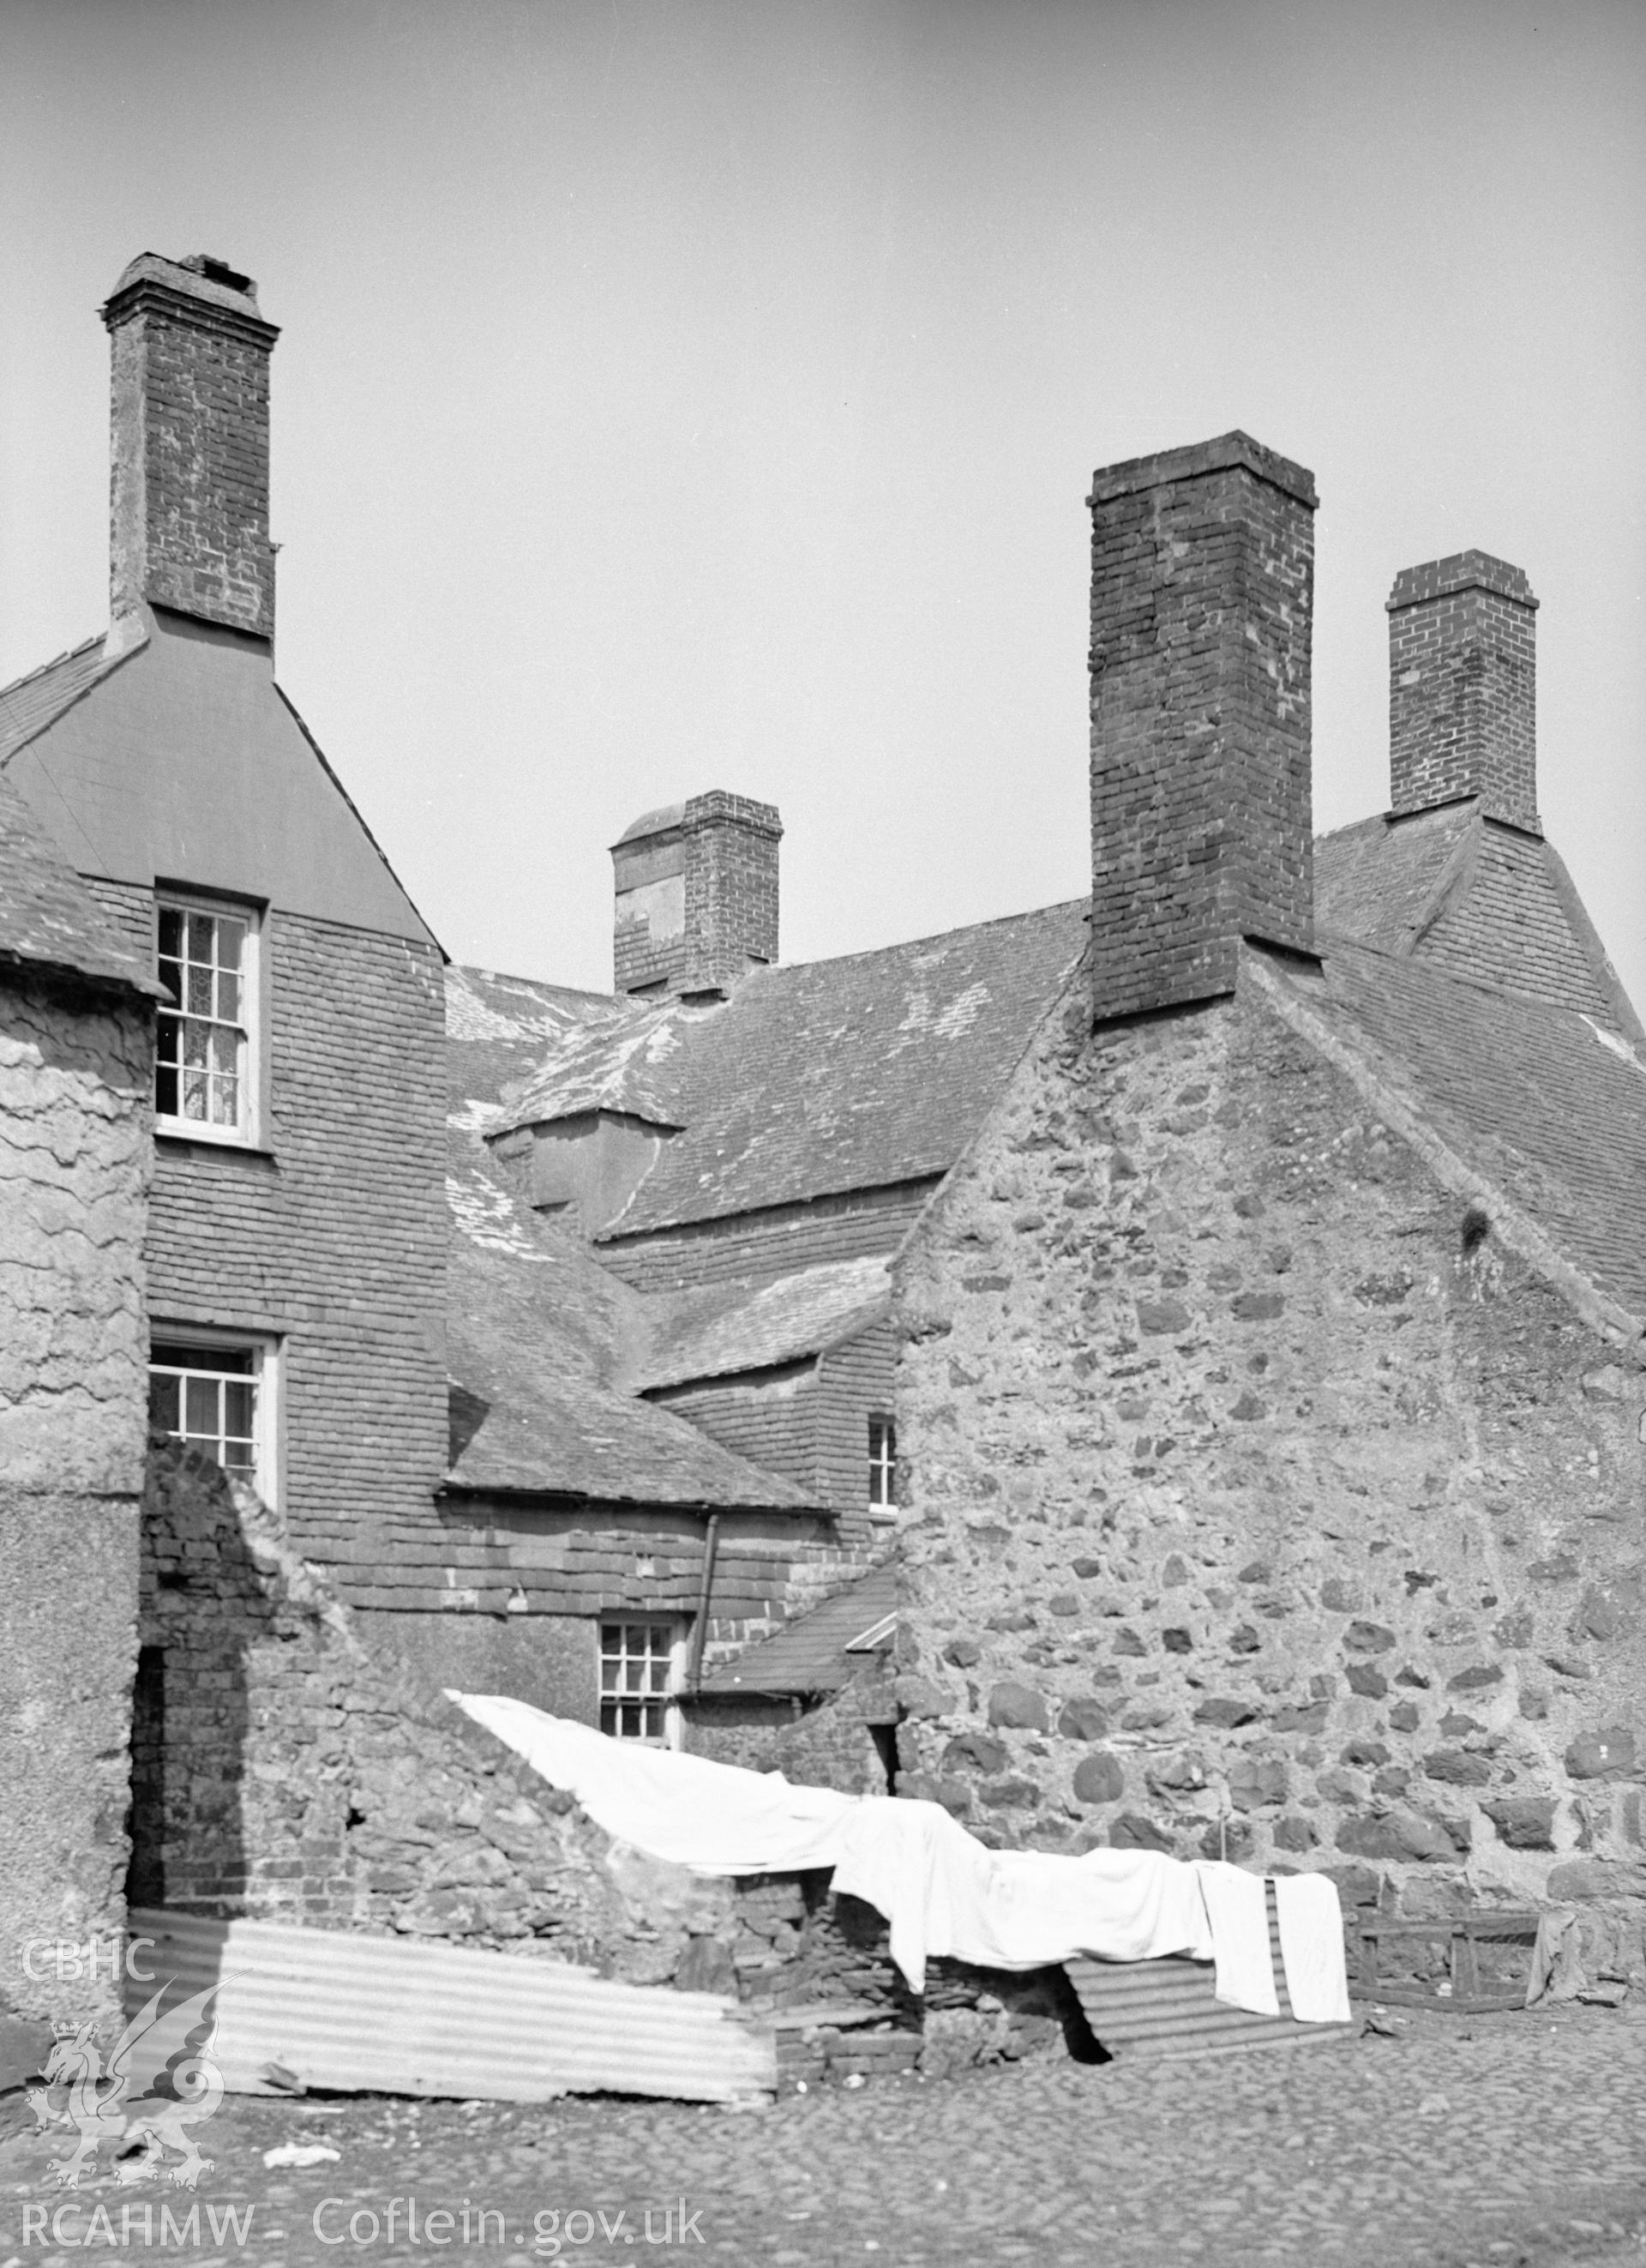 Black and white nitrate negative showing exterior view of Brynodol.